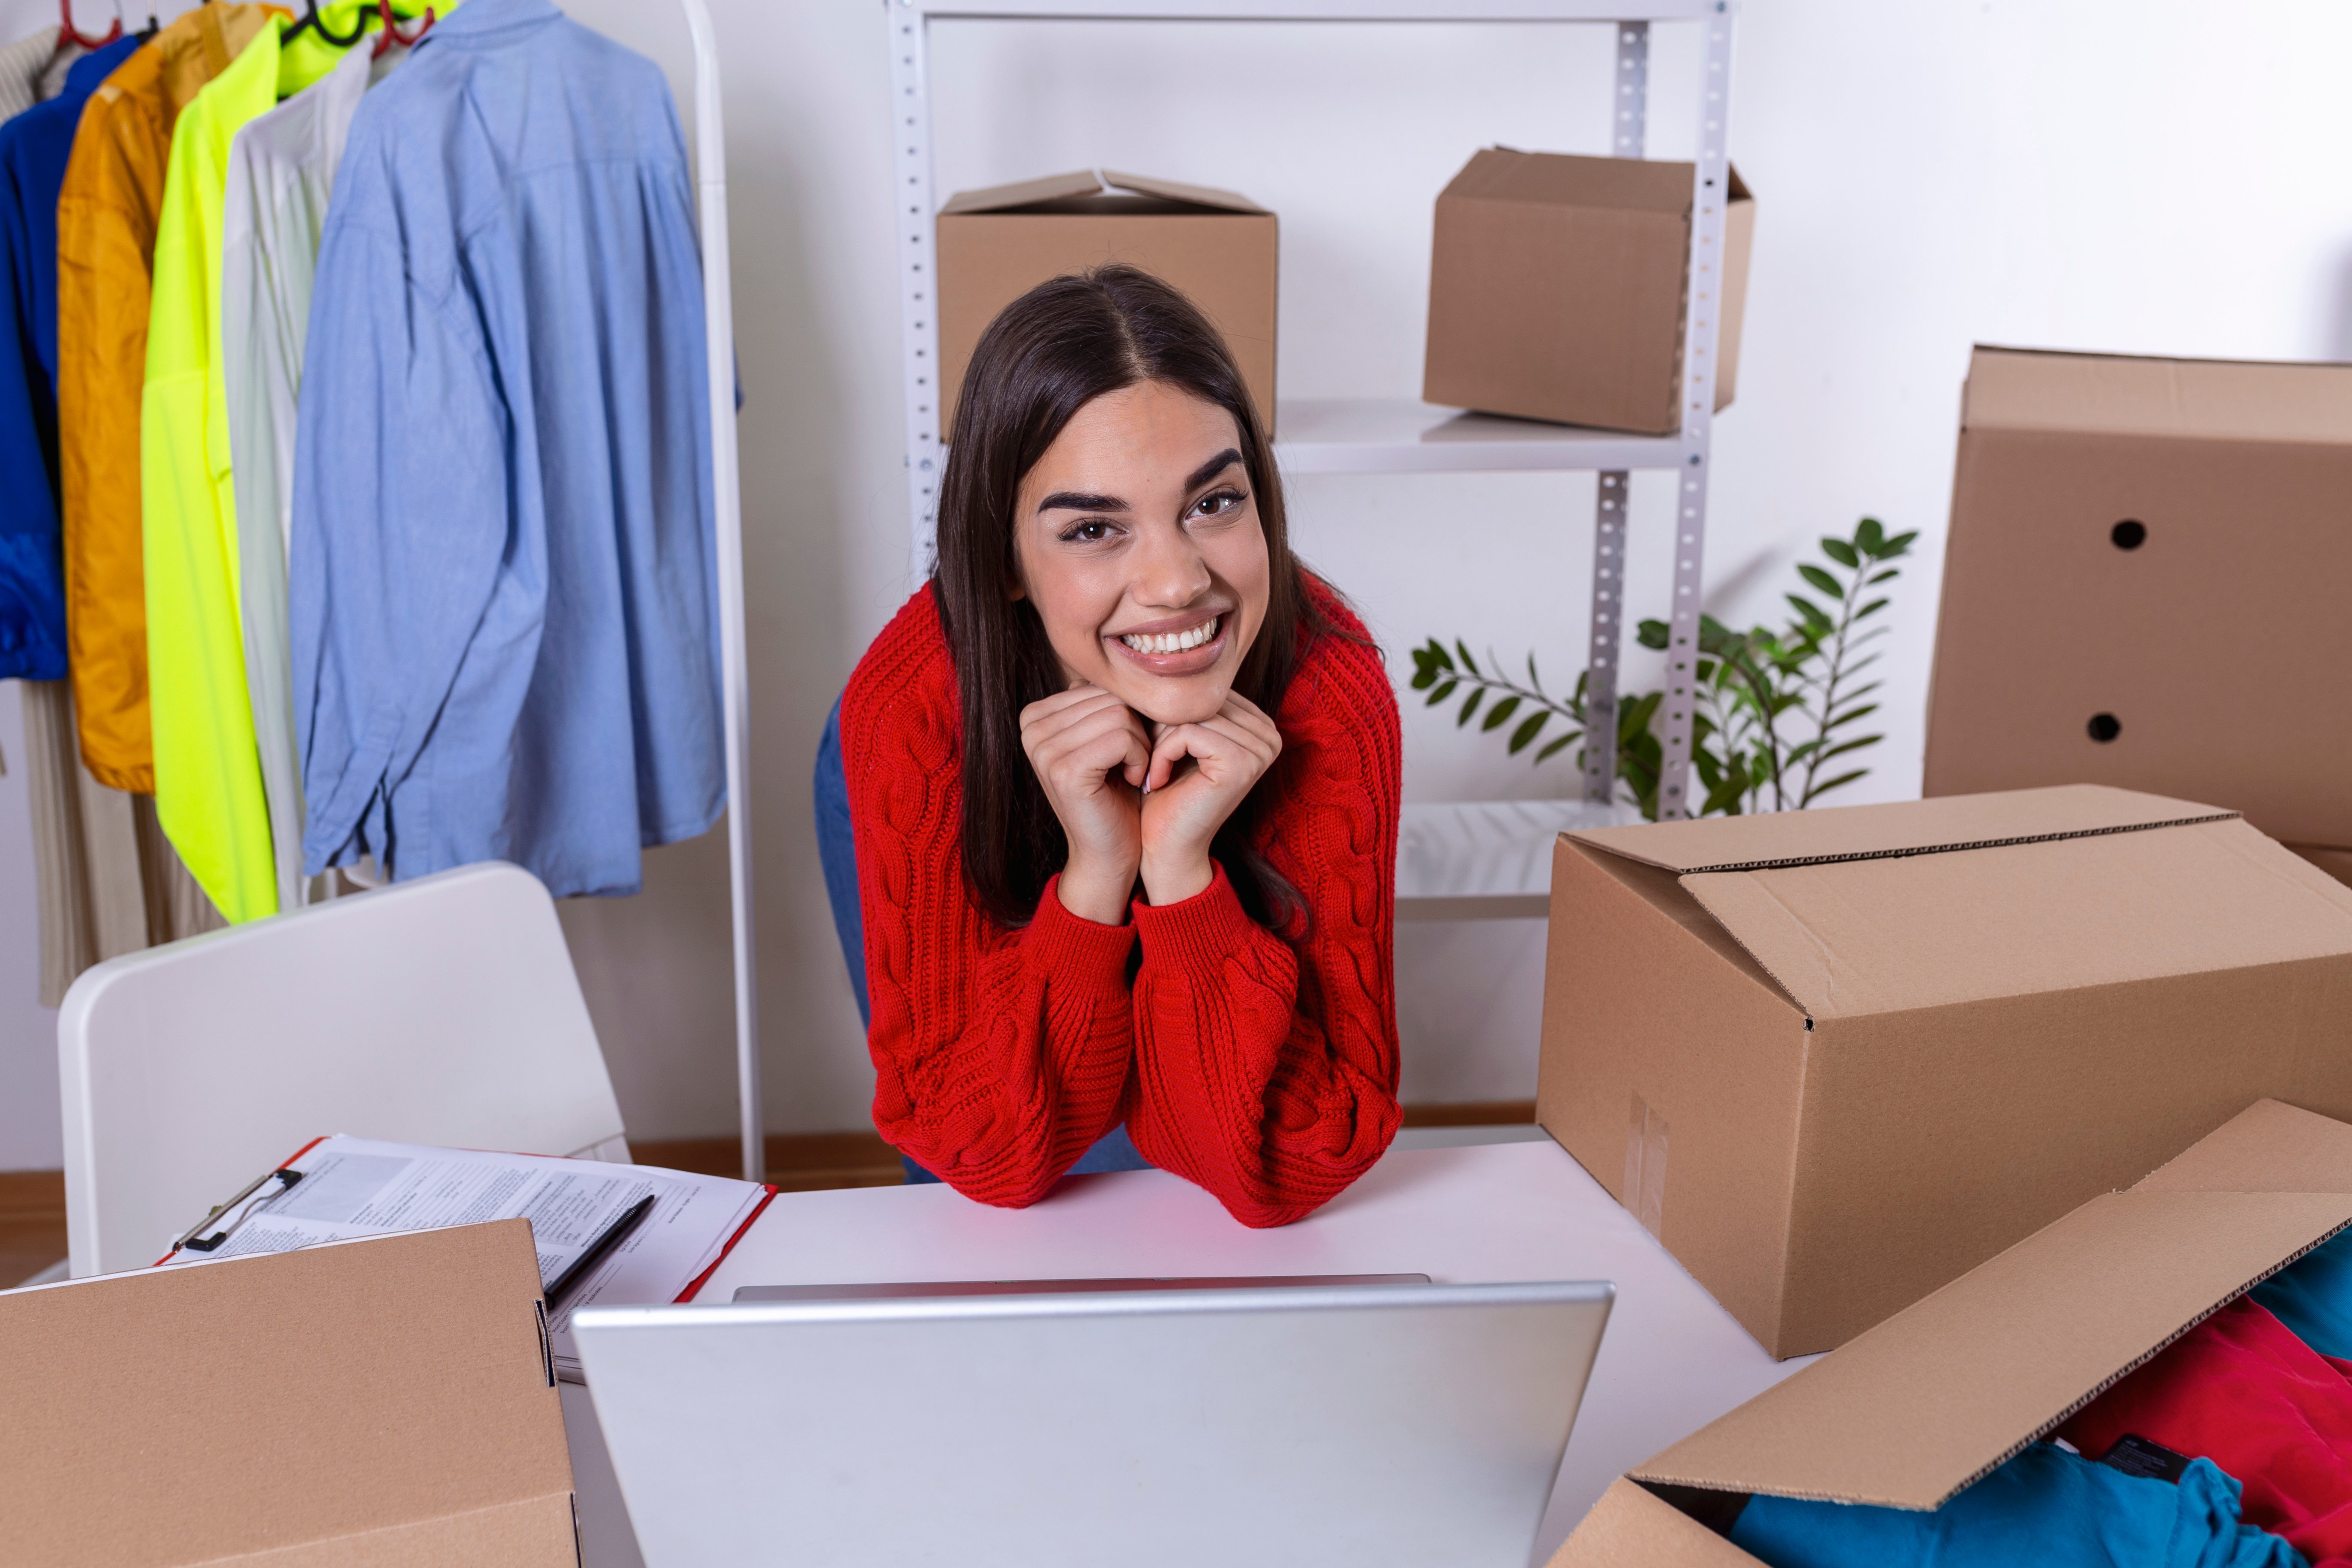 young-woman-owener-of-small-business-packing-product-in-boxes-preparing-it-for-delivery-women-packing-package-with-her-products-that-she-selling-online